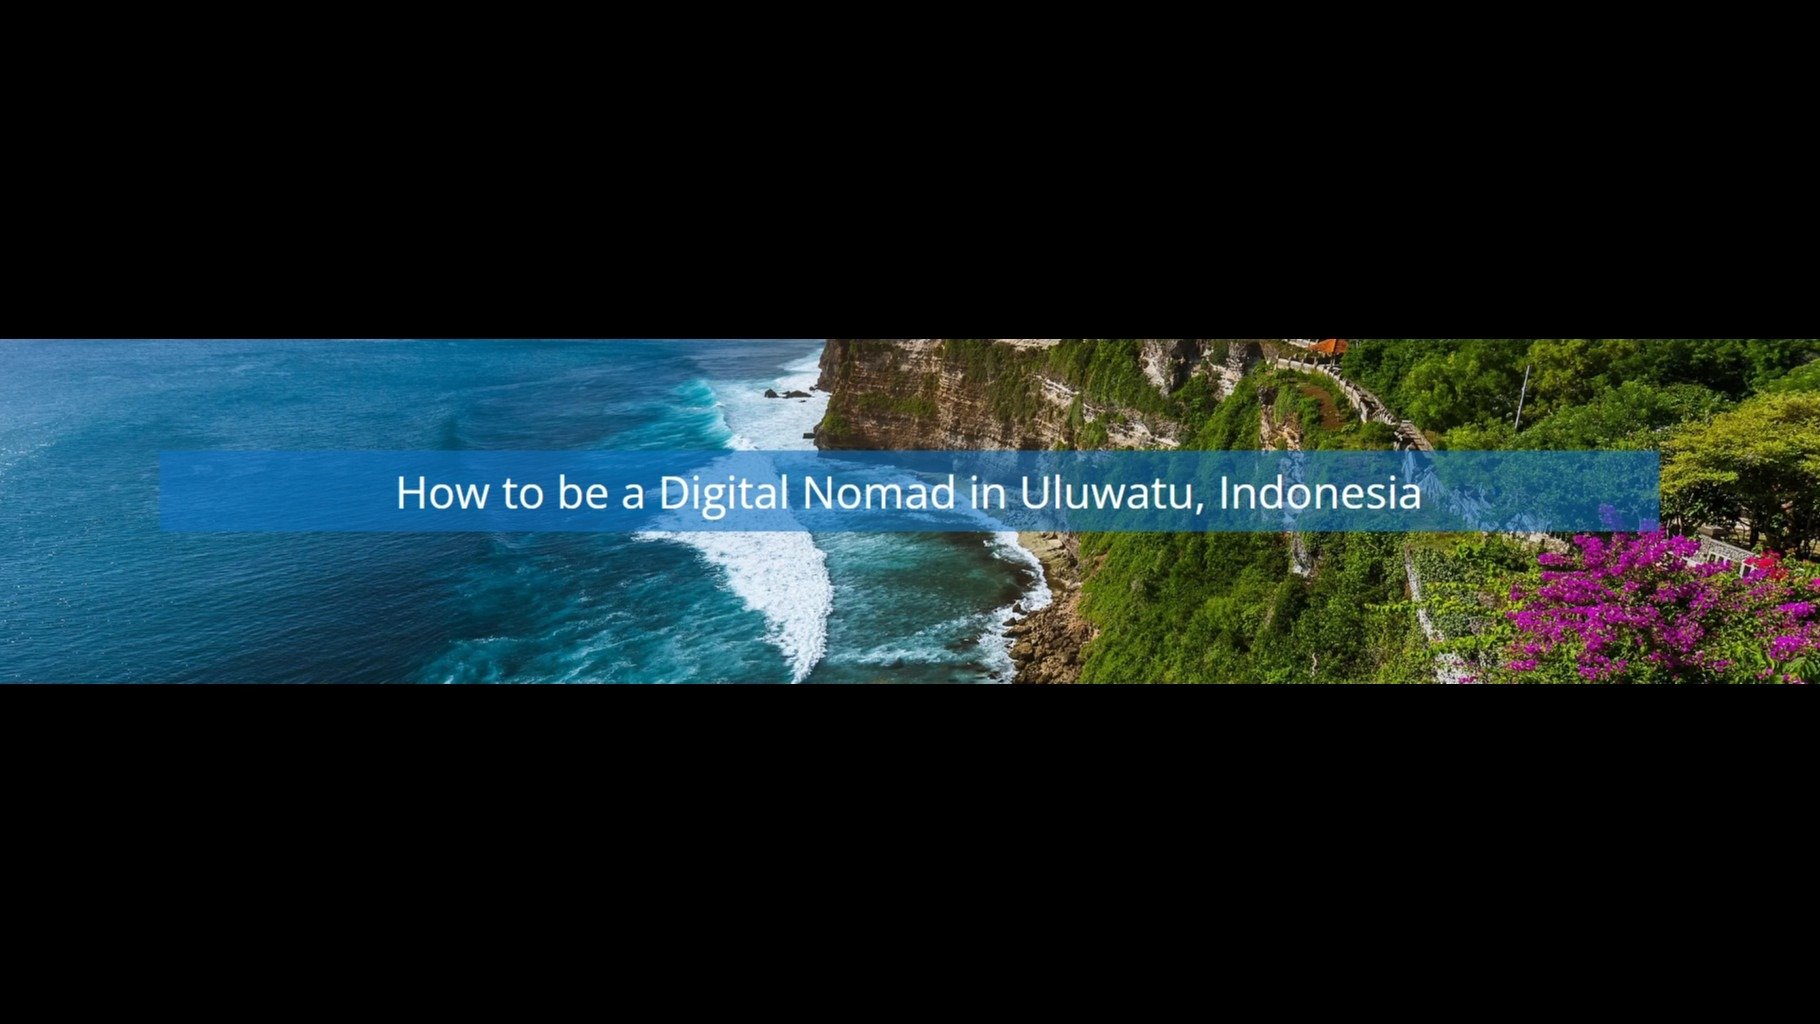 Find The Best Surf Beaches & Villas In Uluwatu For Digital Nomads In This Guide